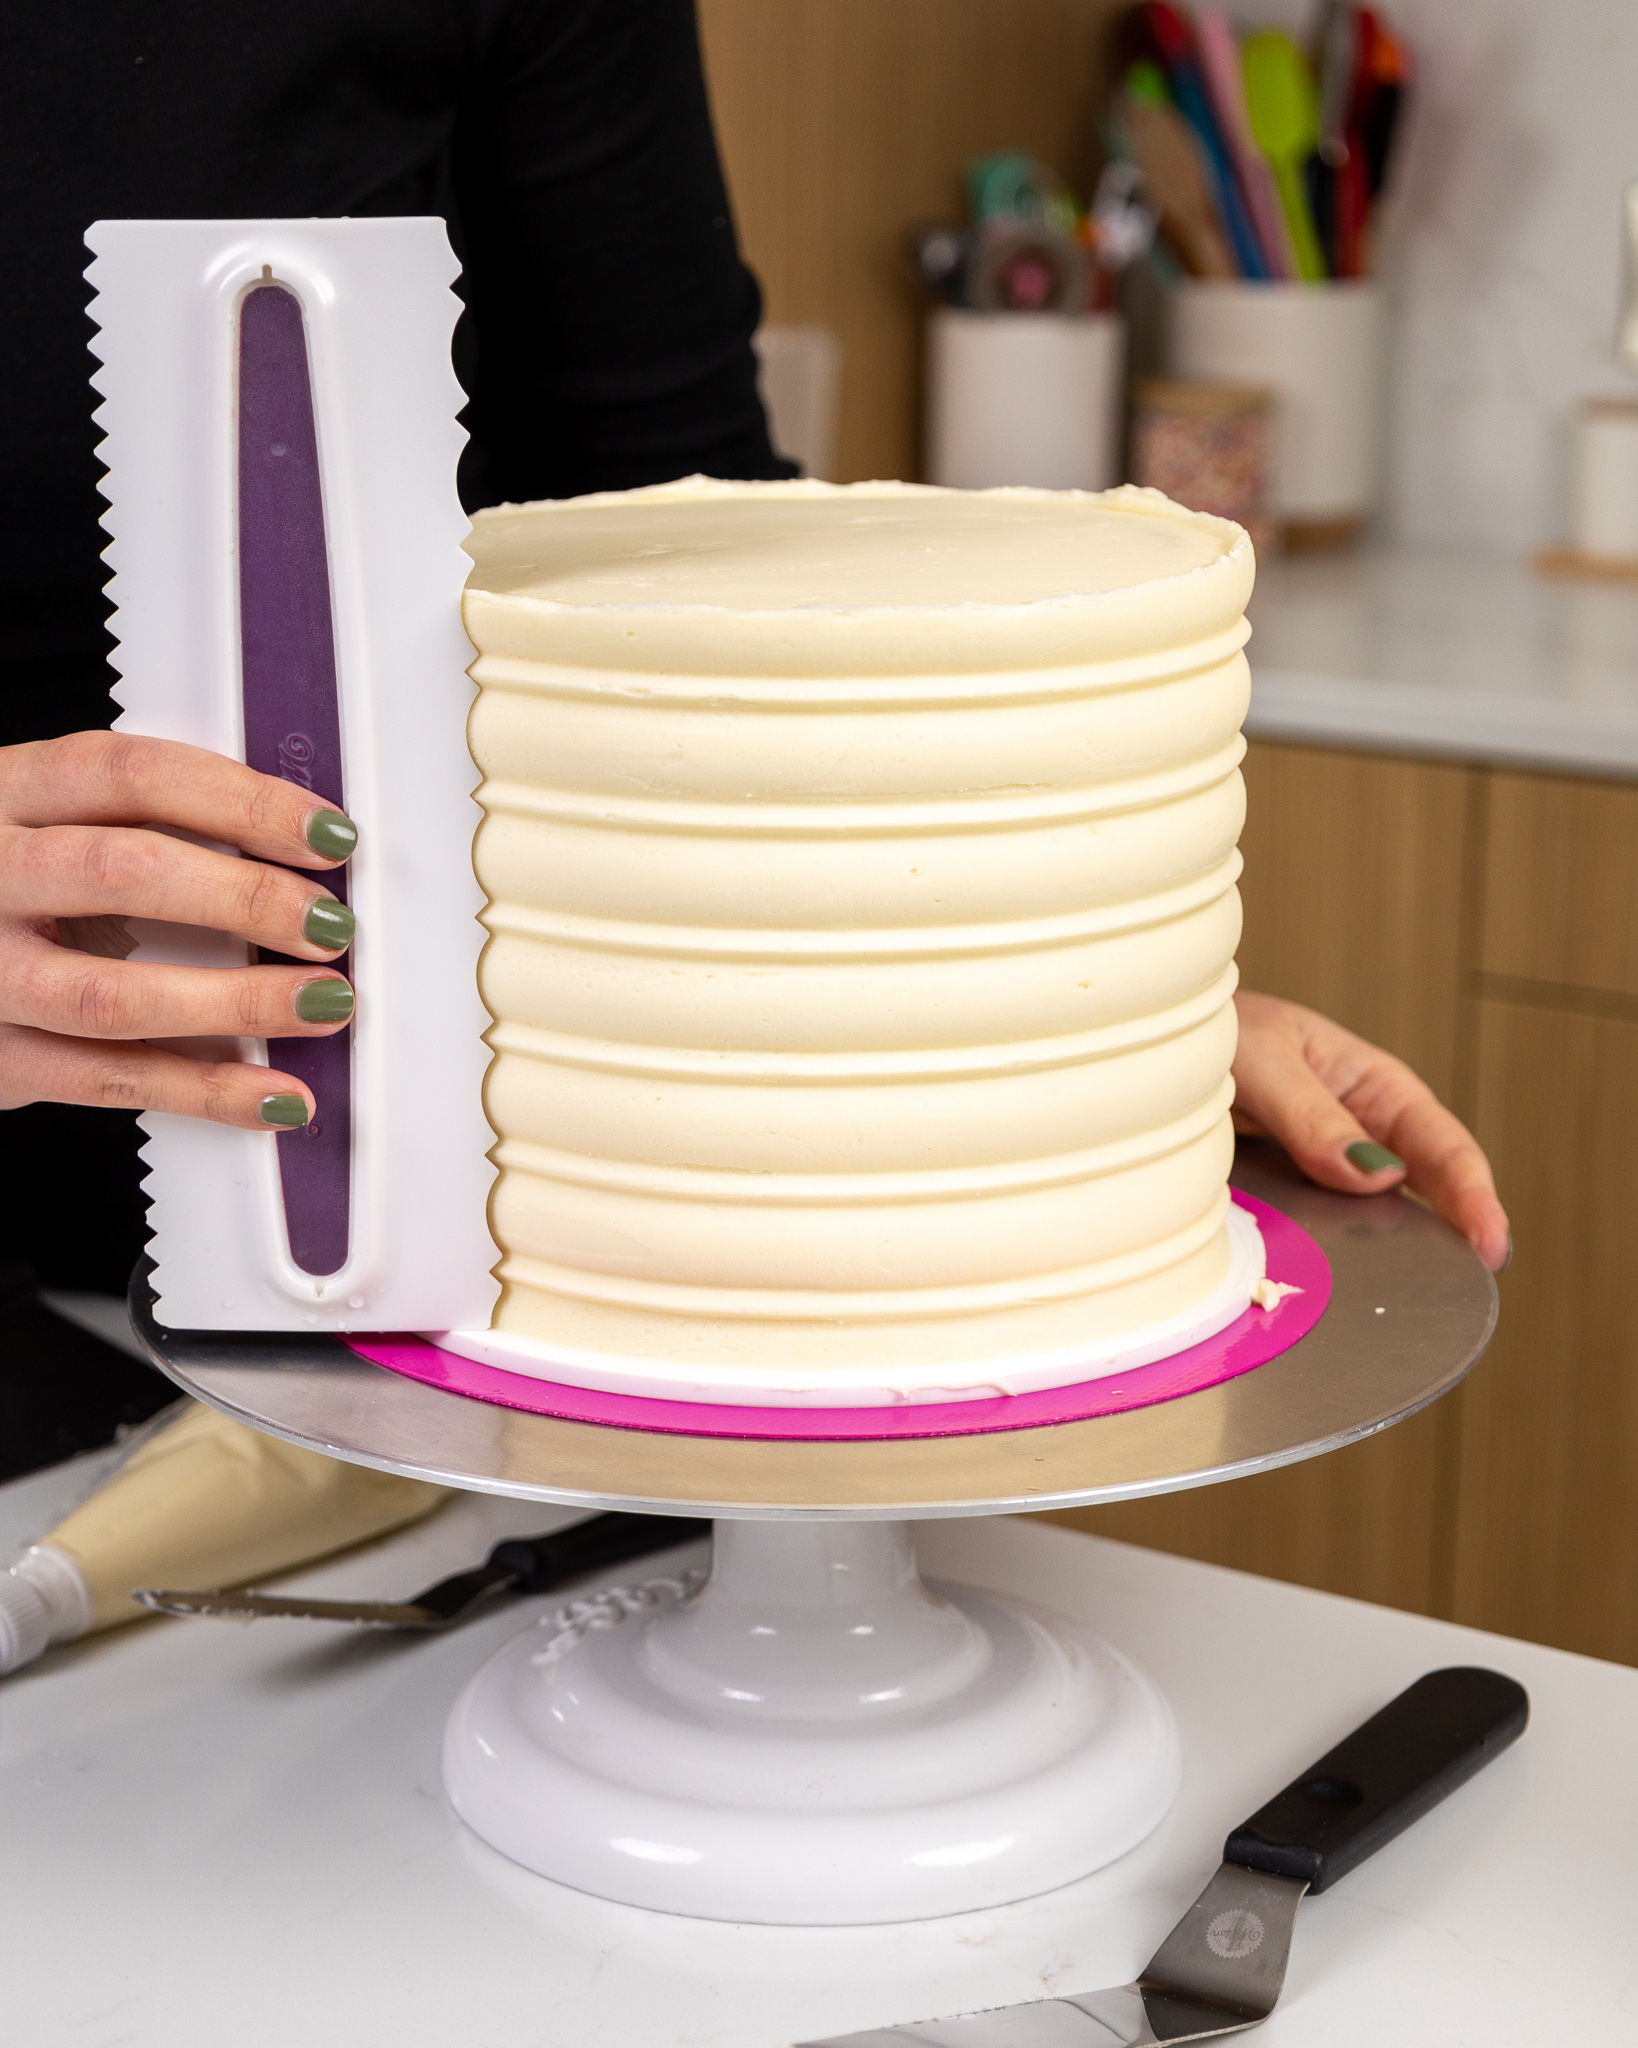 Learn Basic Cake Frosting Tips | Online Recipe | The Maya Kitchen